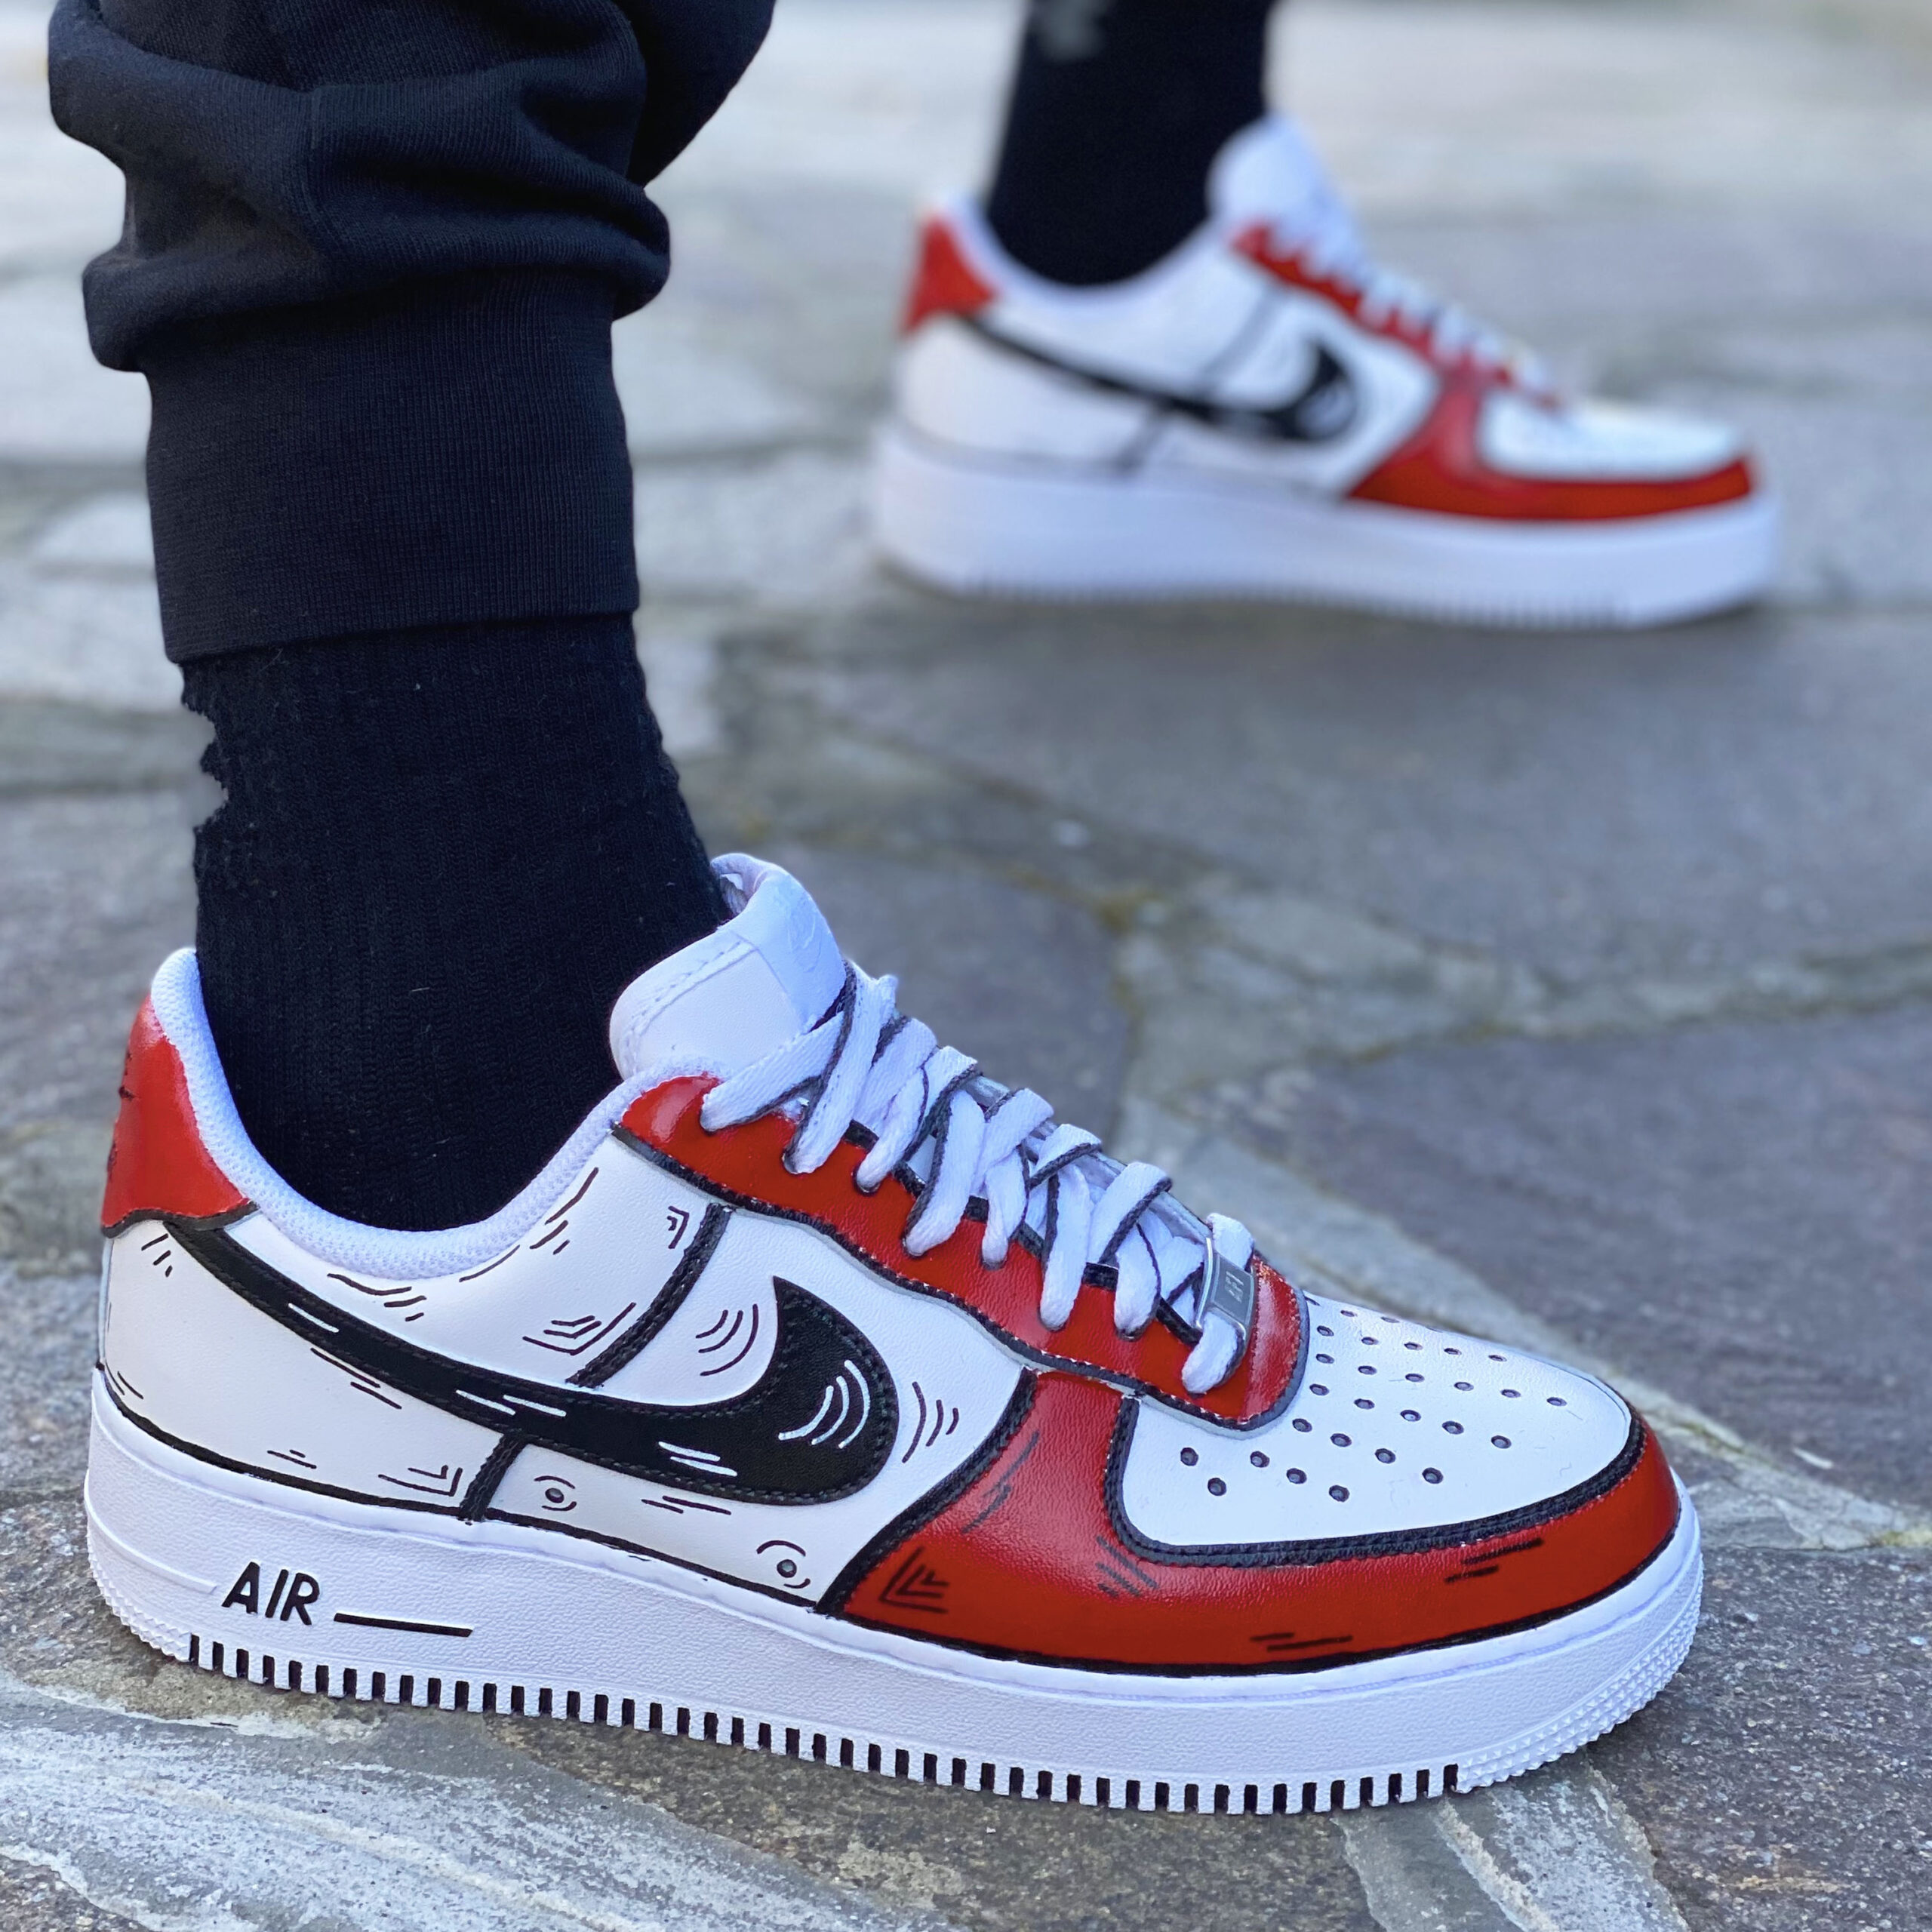 air force 1 nere rosse e bianche